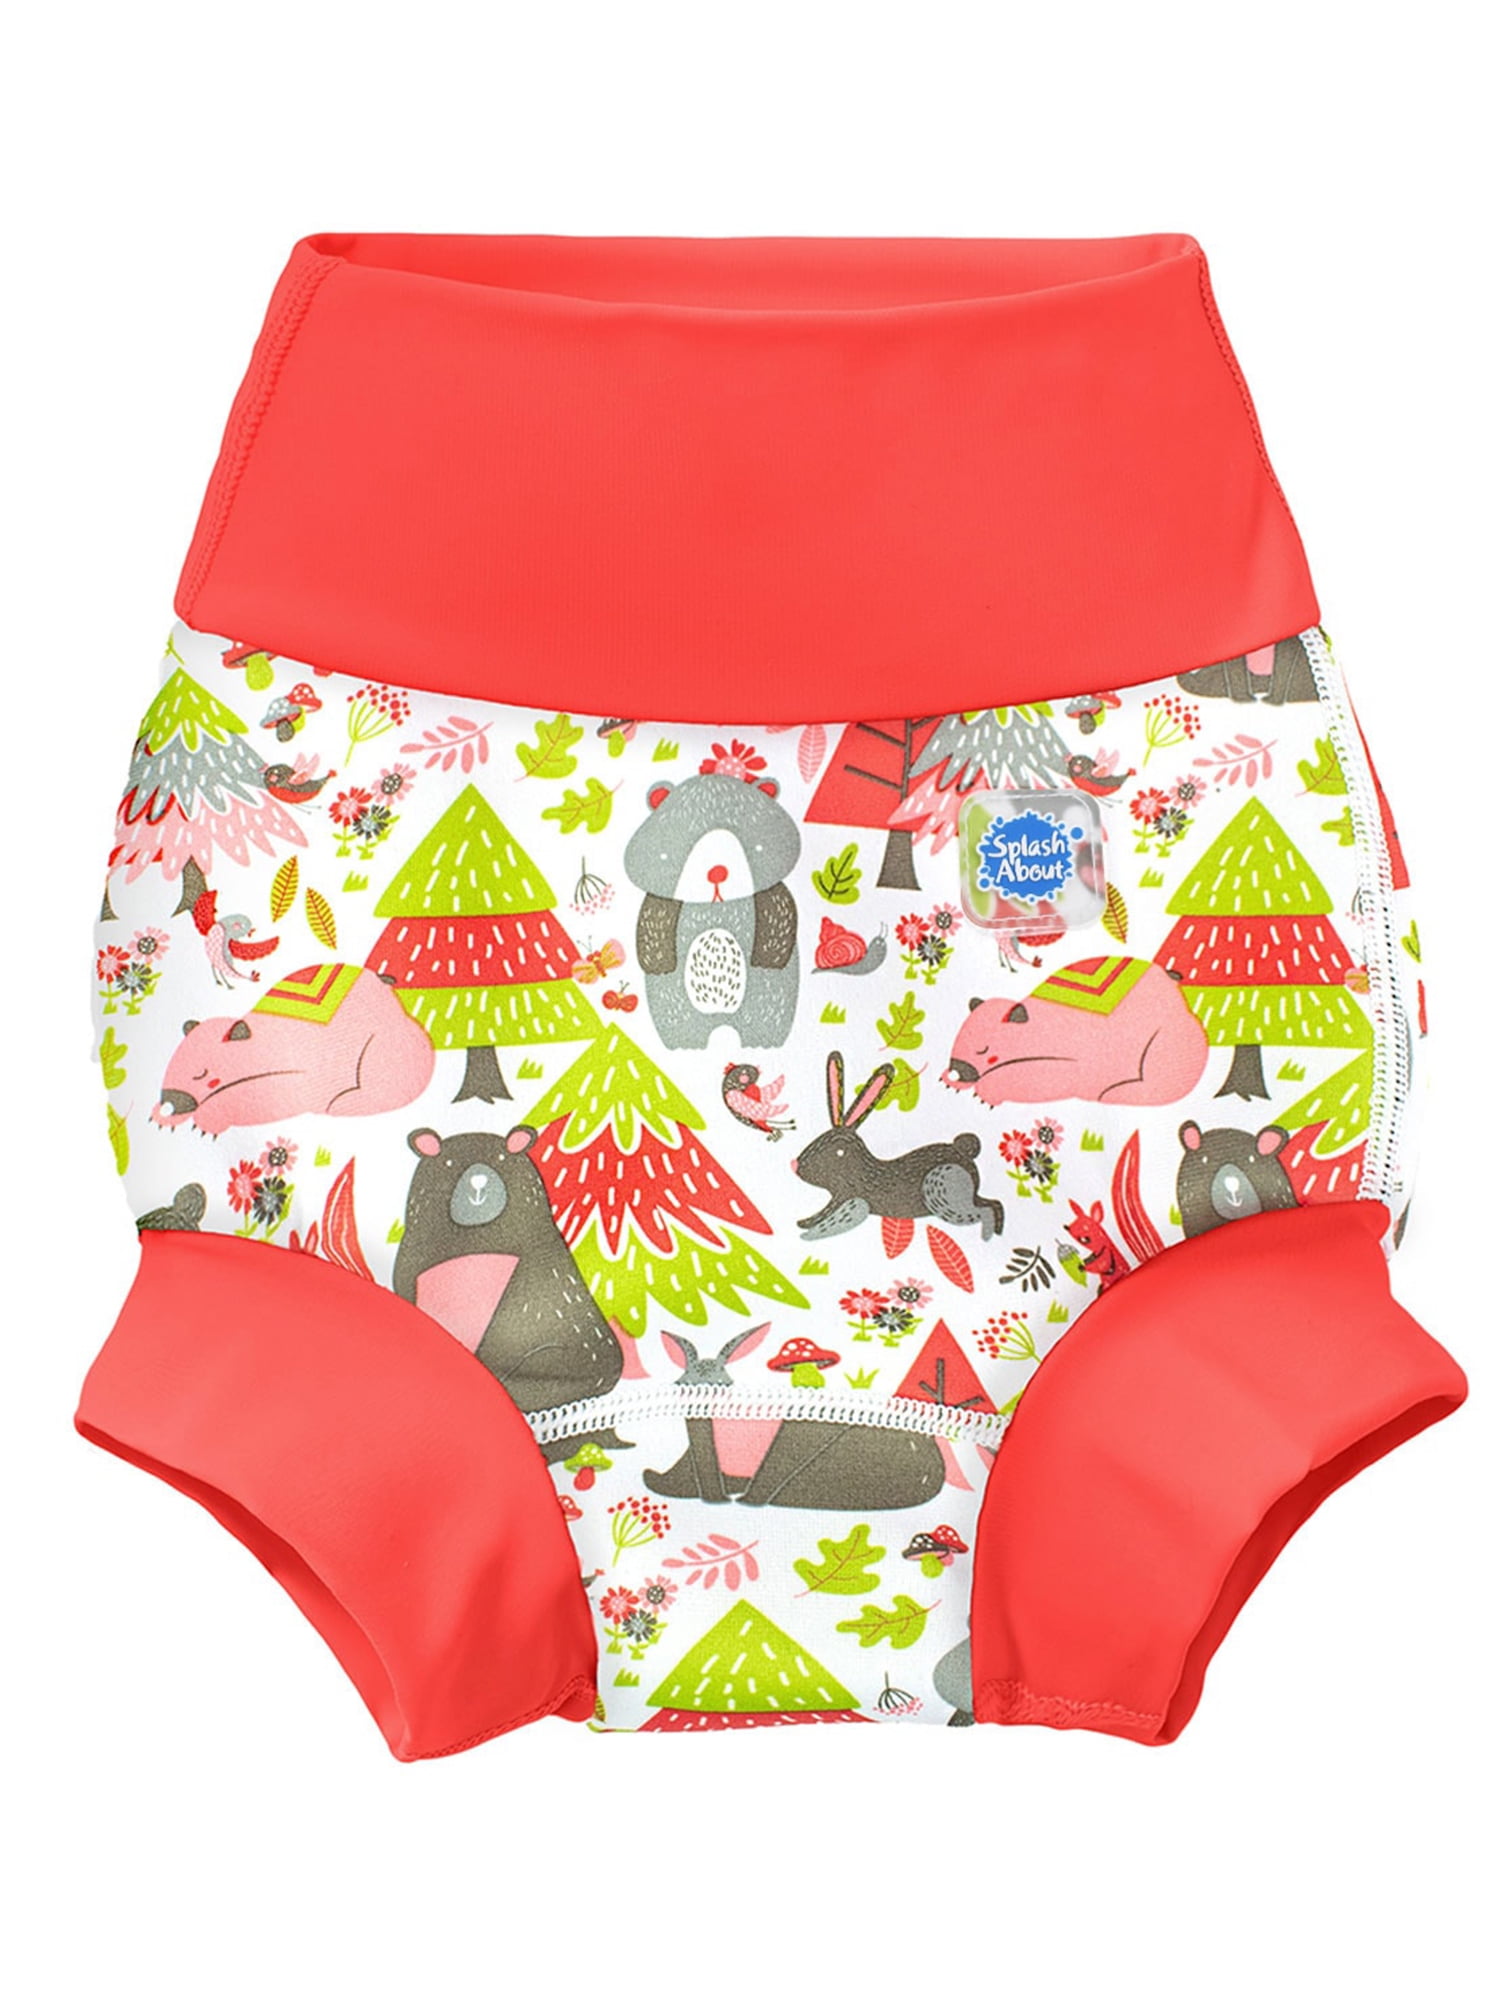 Owl and Pussycat Pattern Womens Swim Trunks 3D Printed Beach Board Shorts with Pockets for Teen Girls